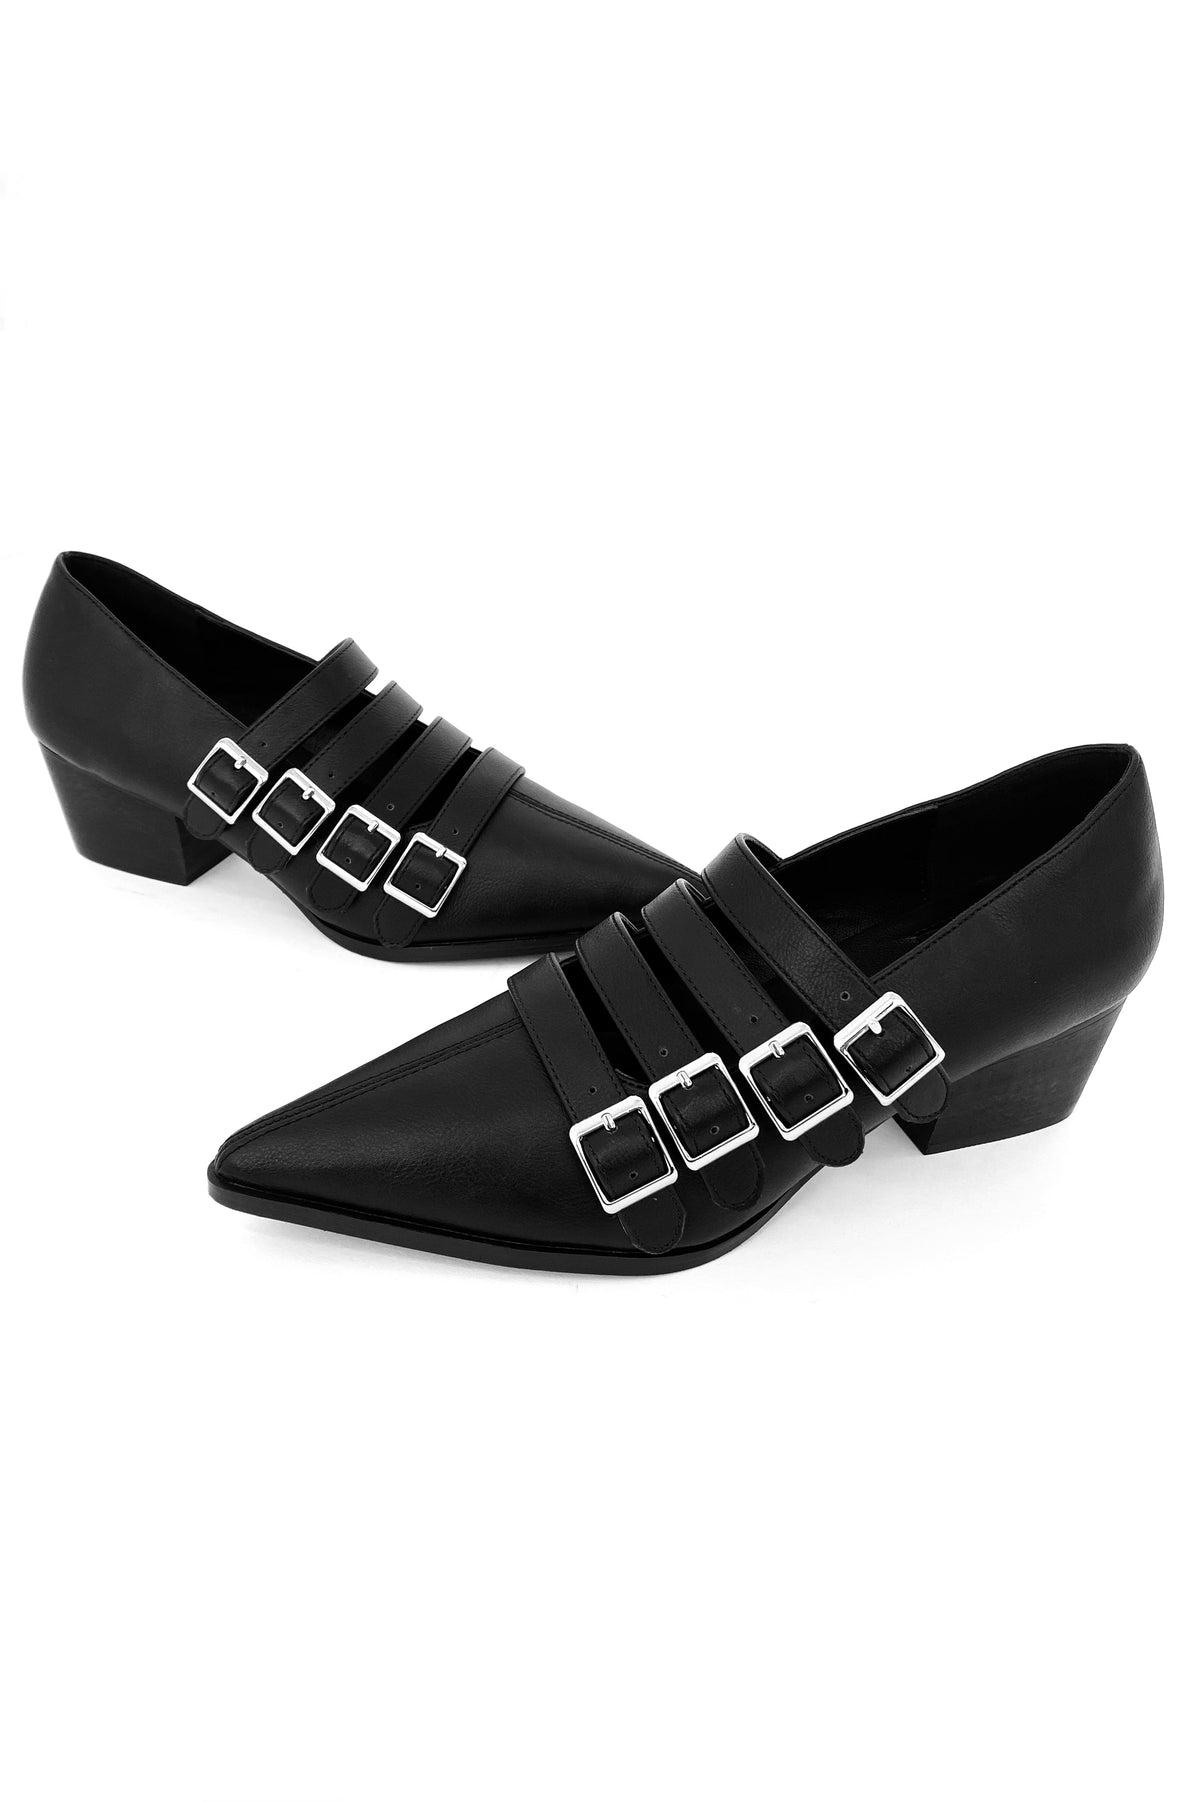 black vegan leather shoes with a small heel and four straps with metal buckles